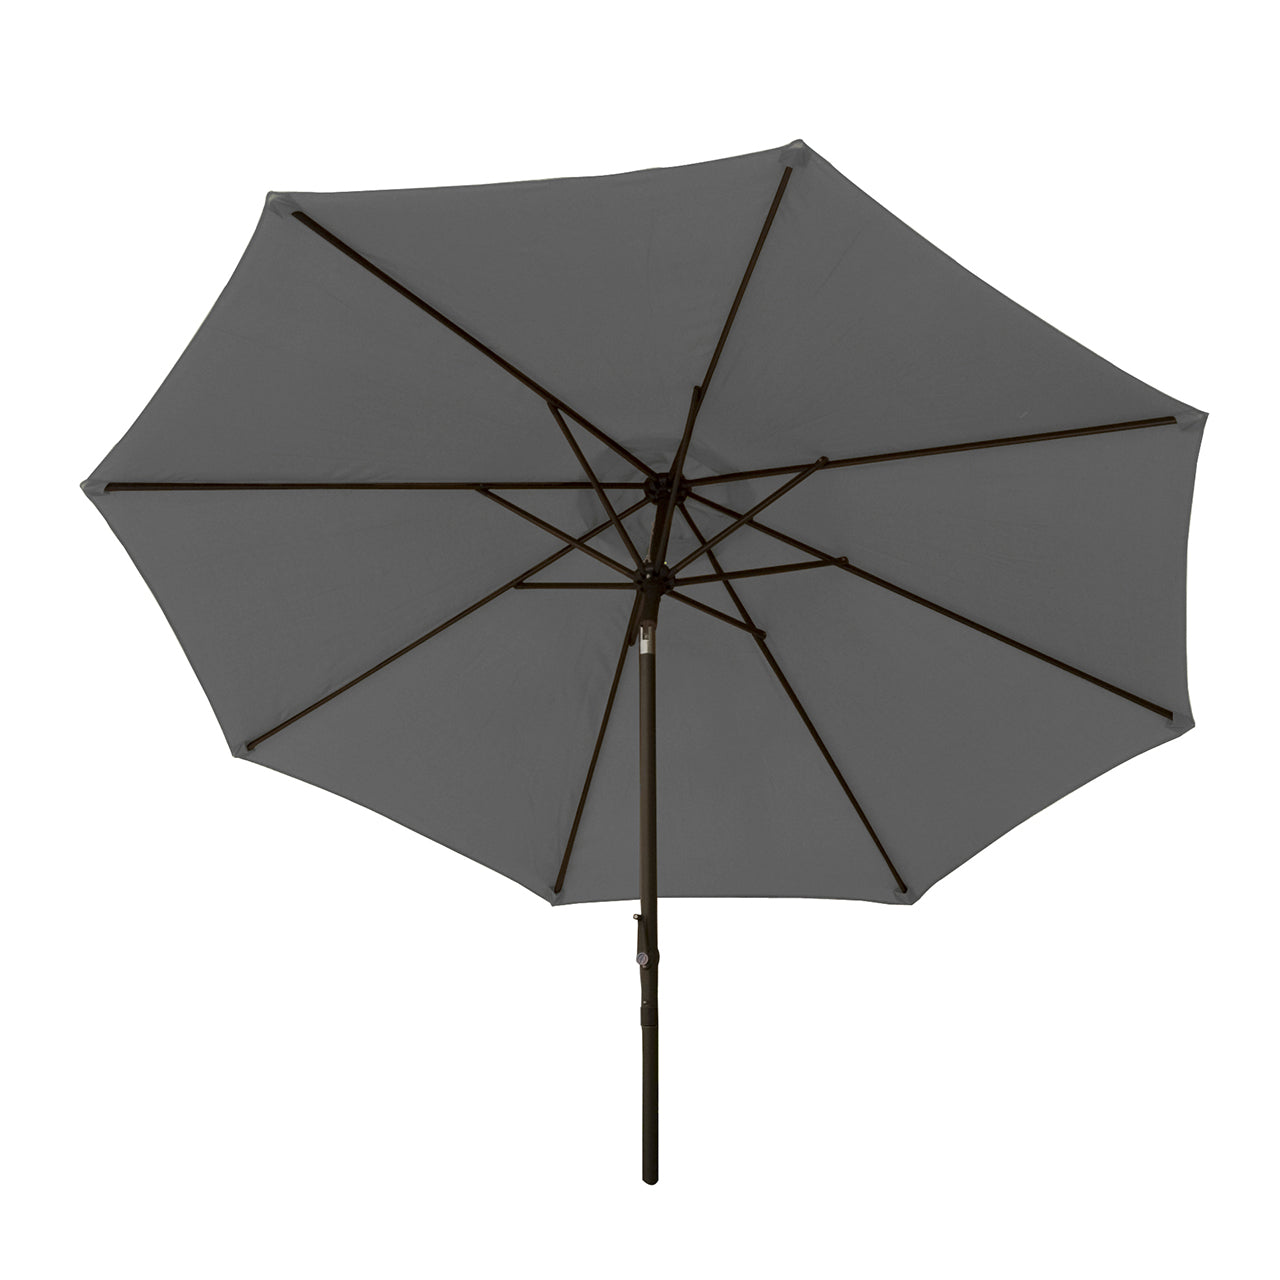 Bliss Outdoors 9-foot Patio Umbrella with Aluminum Pole in the gray variation.